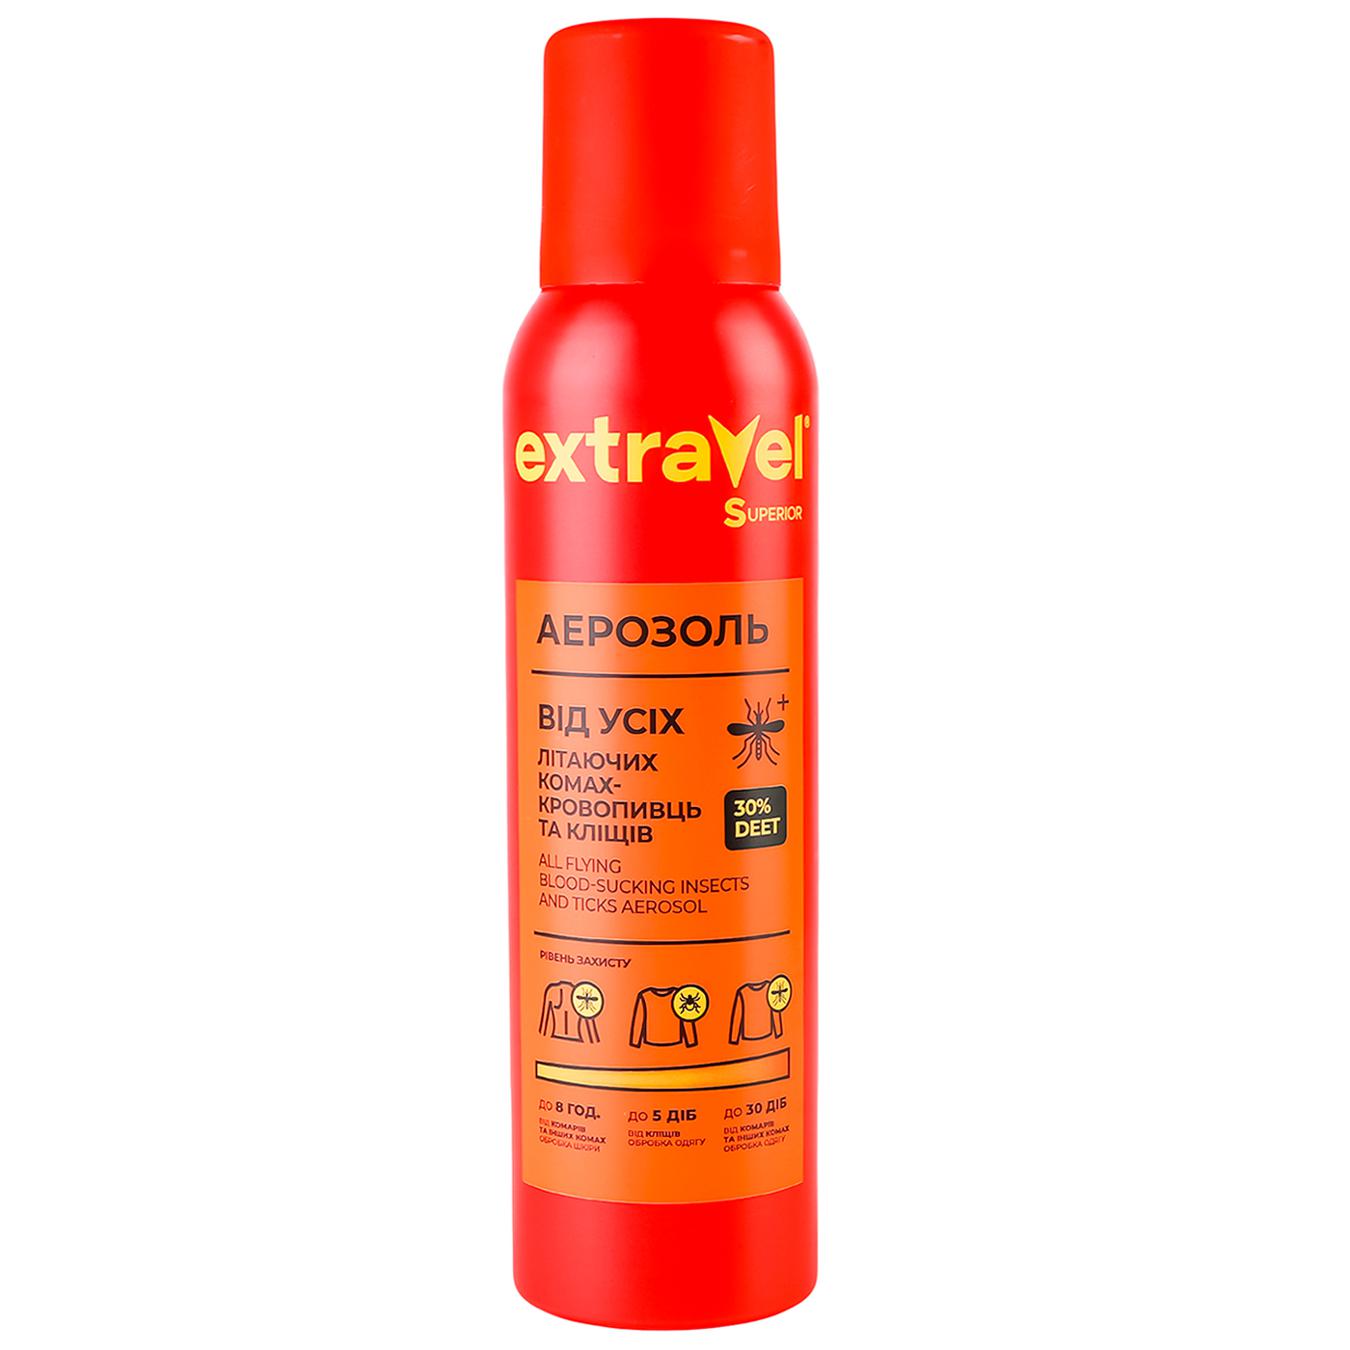 Aerosol repellent Extravel Superior against all flying blood-sucking insects and ticks 100ml